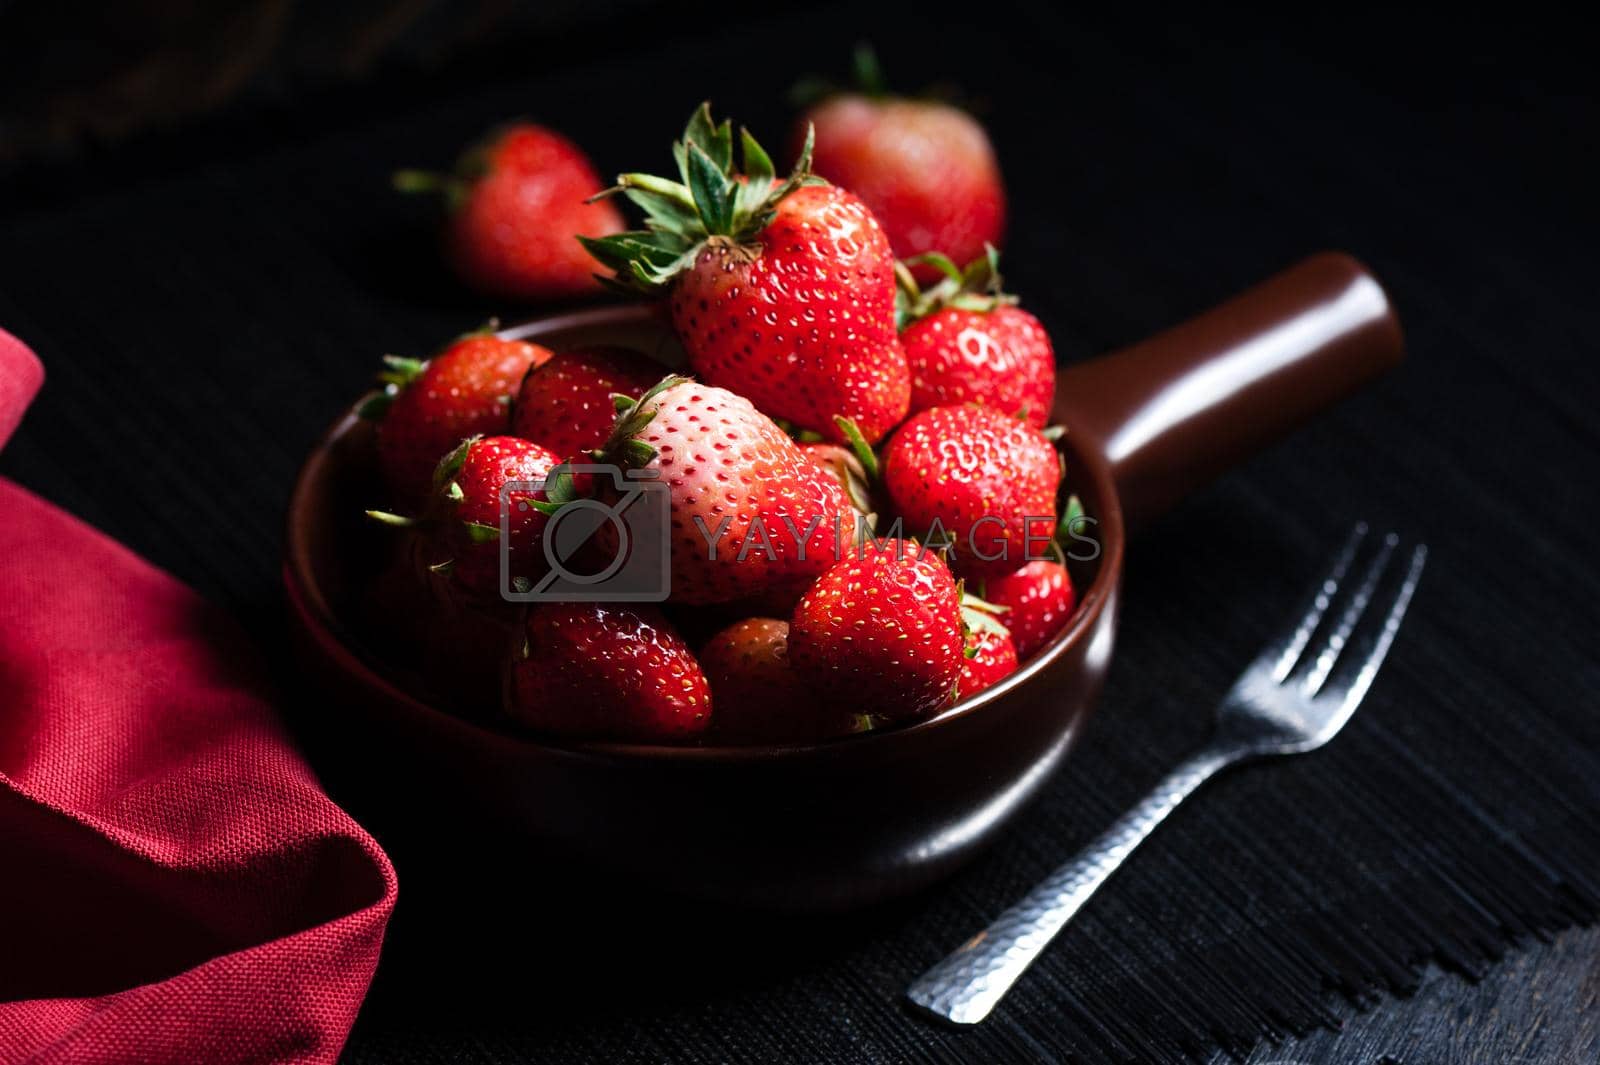 Royalty free image of eating fresh strawberry by norgal